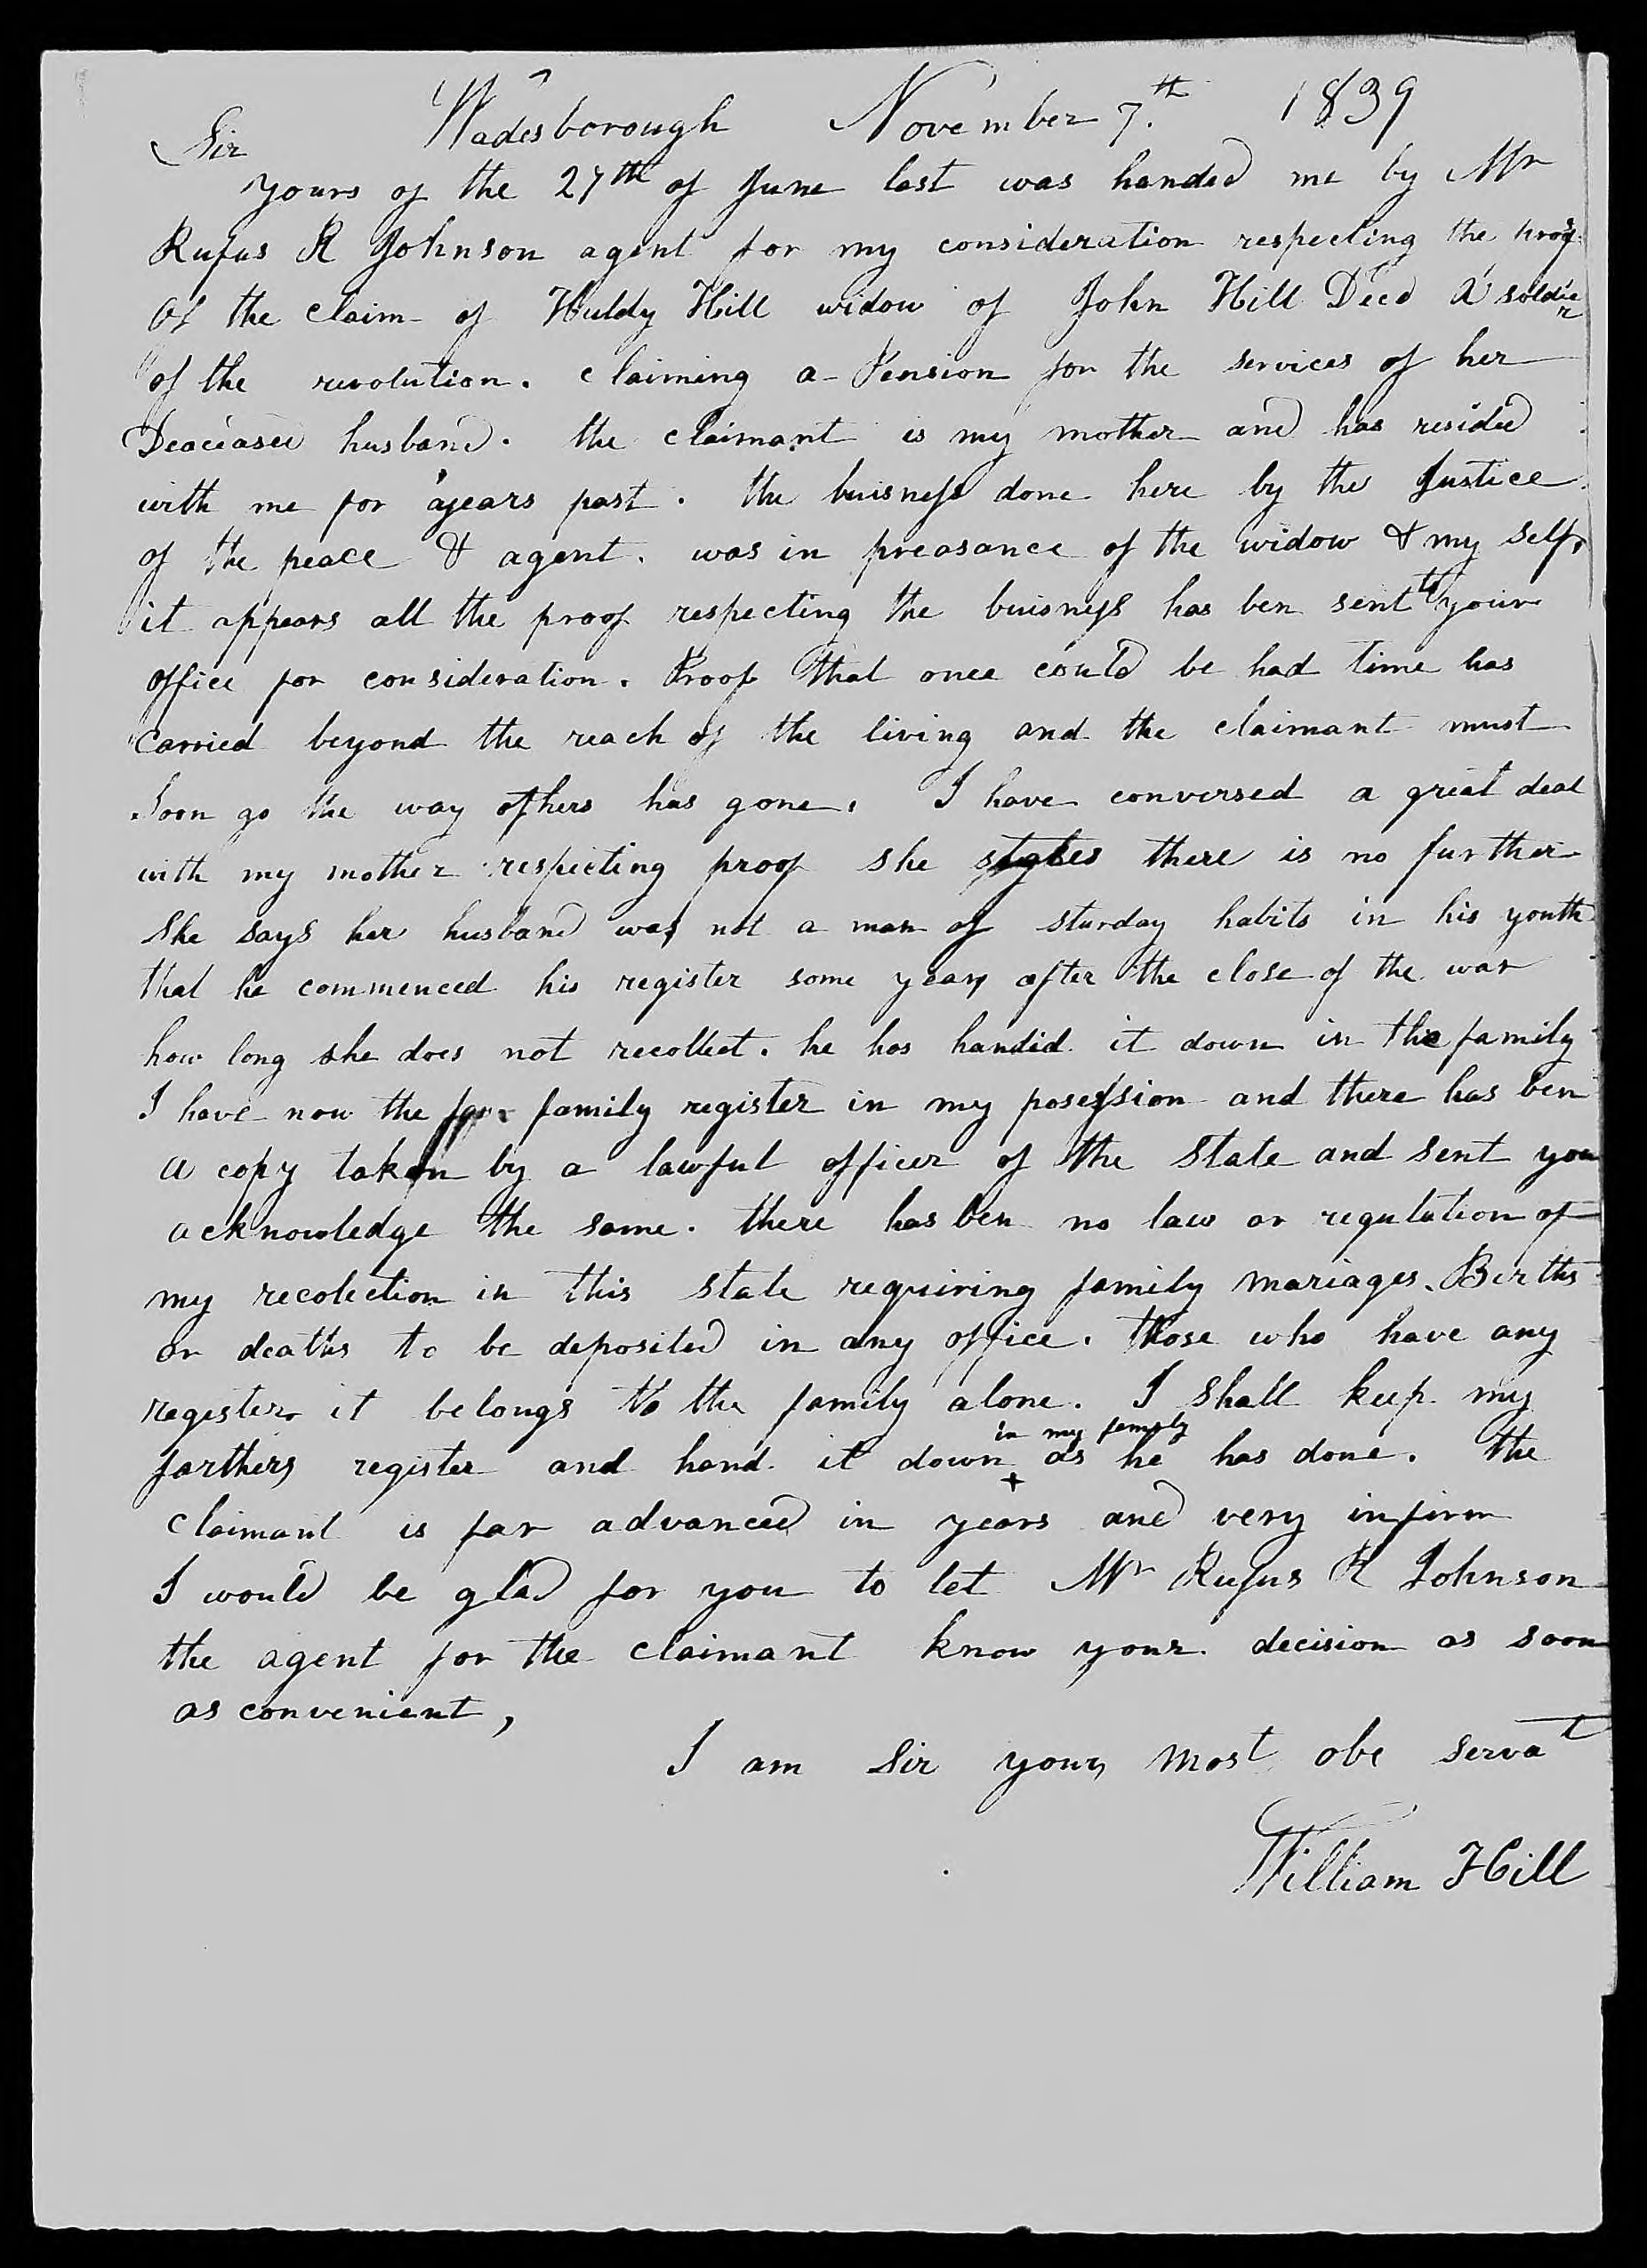 Letter from William Hill to James L. Edwards, 7 November 1839